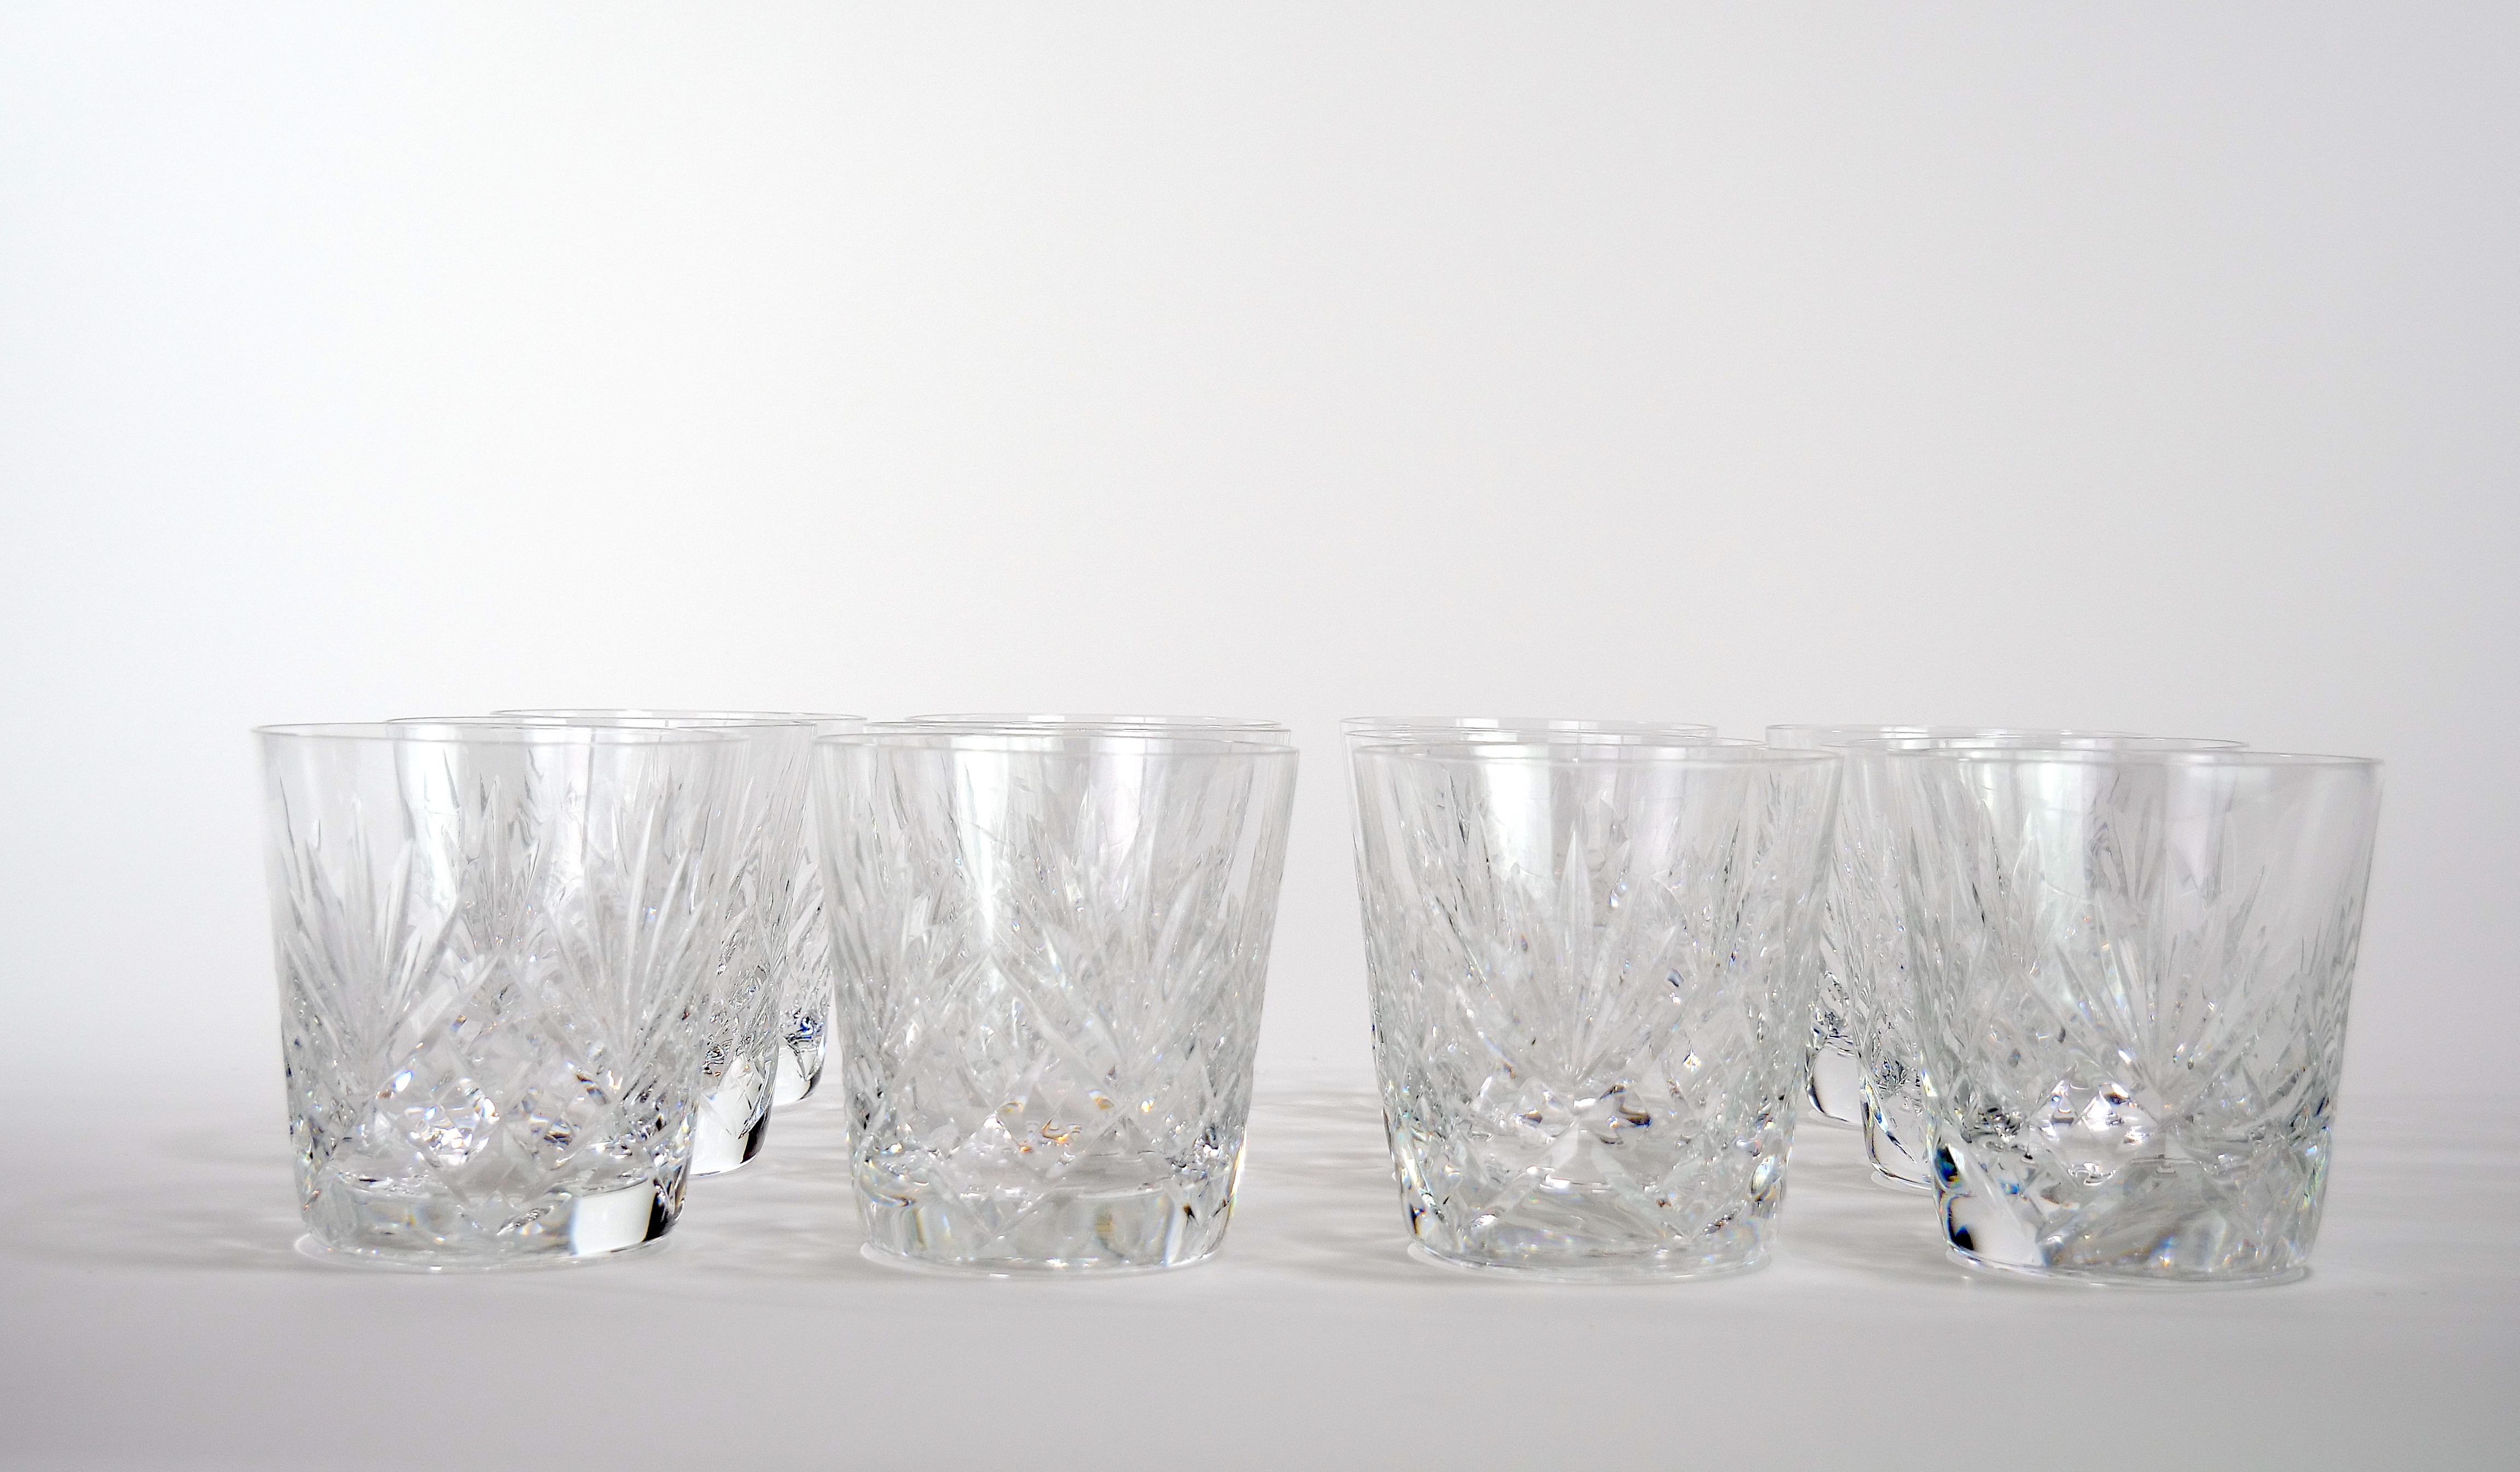 Richly hand cut and mouth blown regular old fashioned barware and tableware glassware service for 12 people. Each glass features a deep cuts that allow the light to retract and shine to a brilliant finish from any angle. Mouth blown and hand cut by